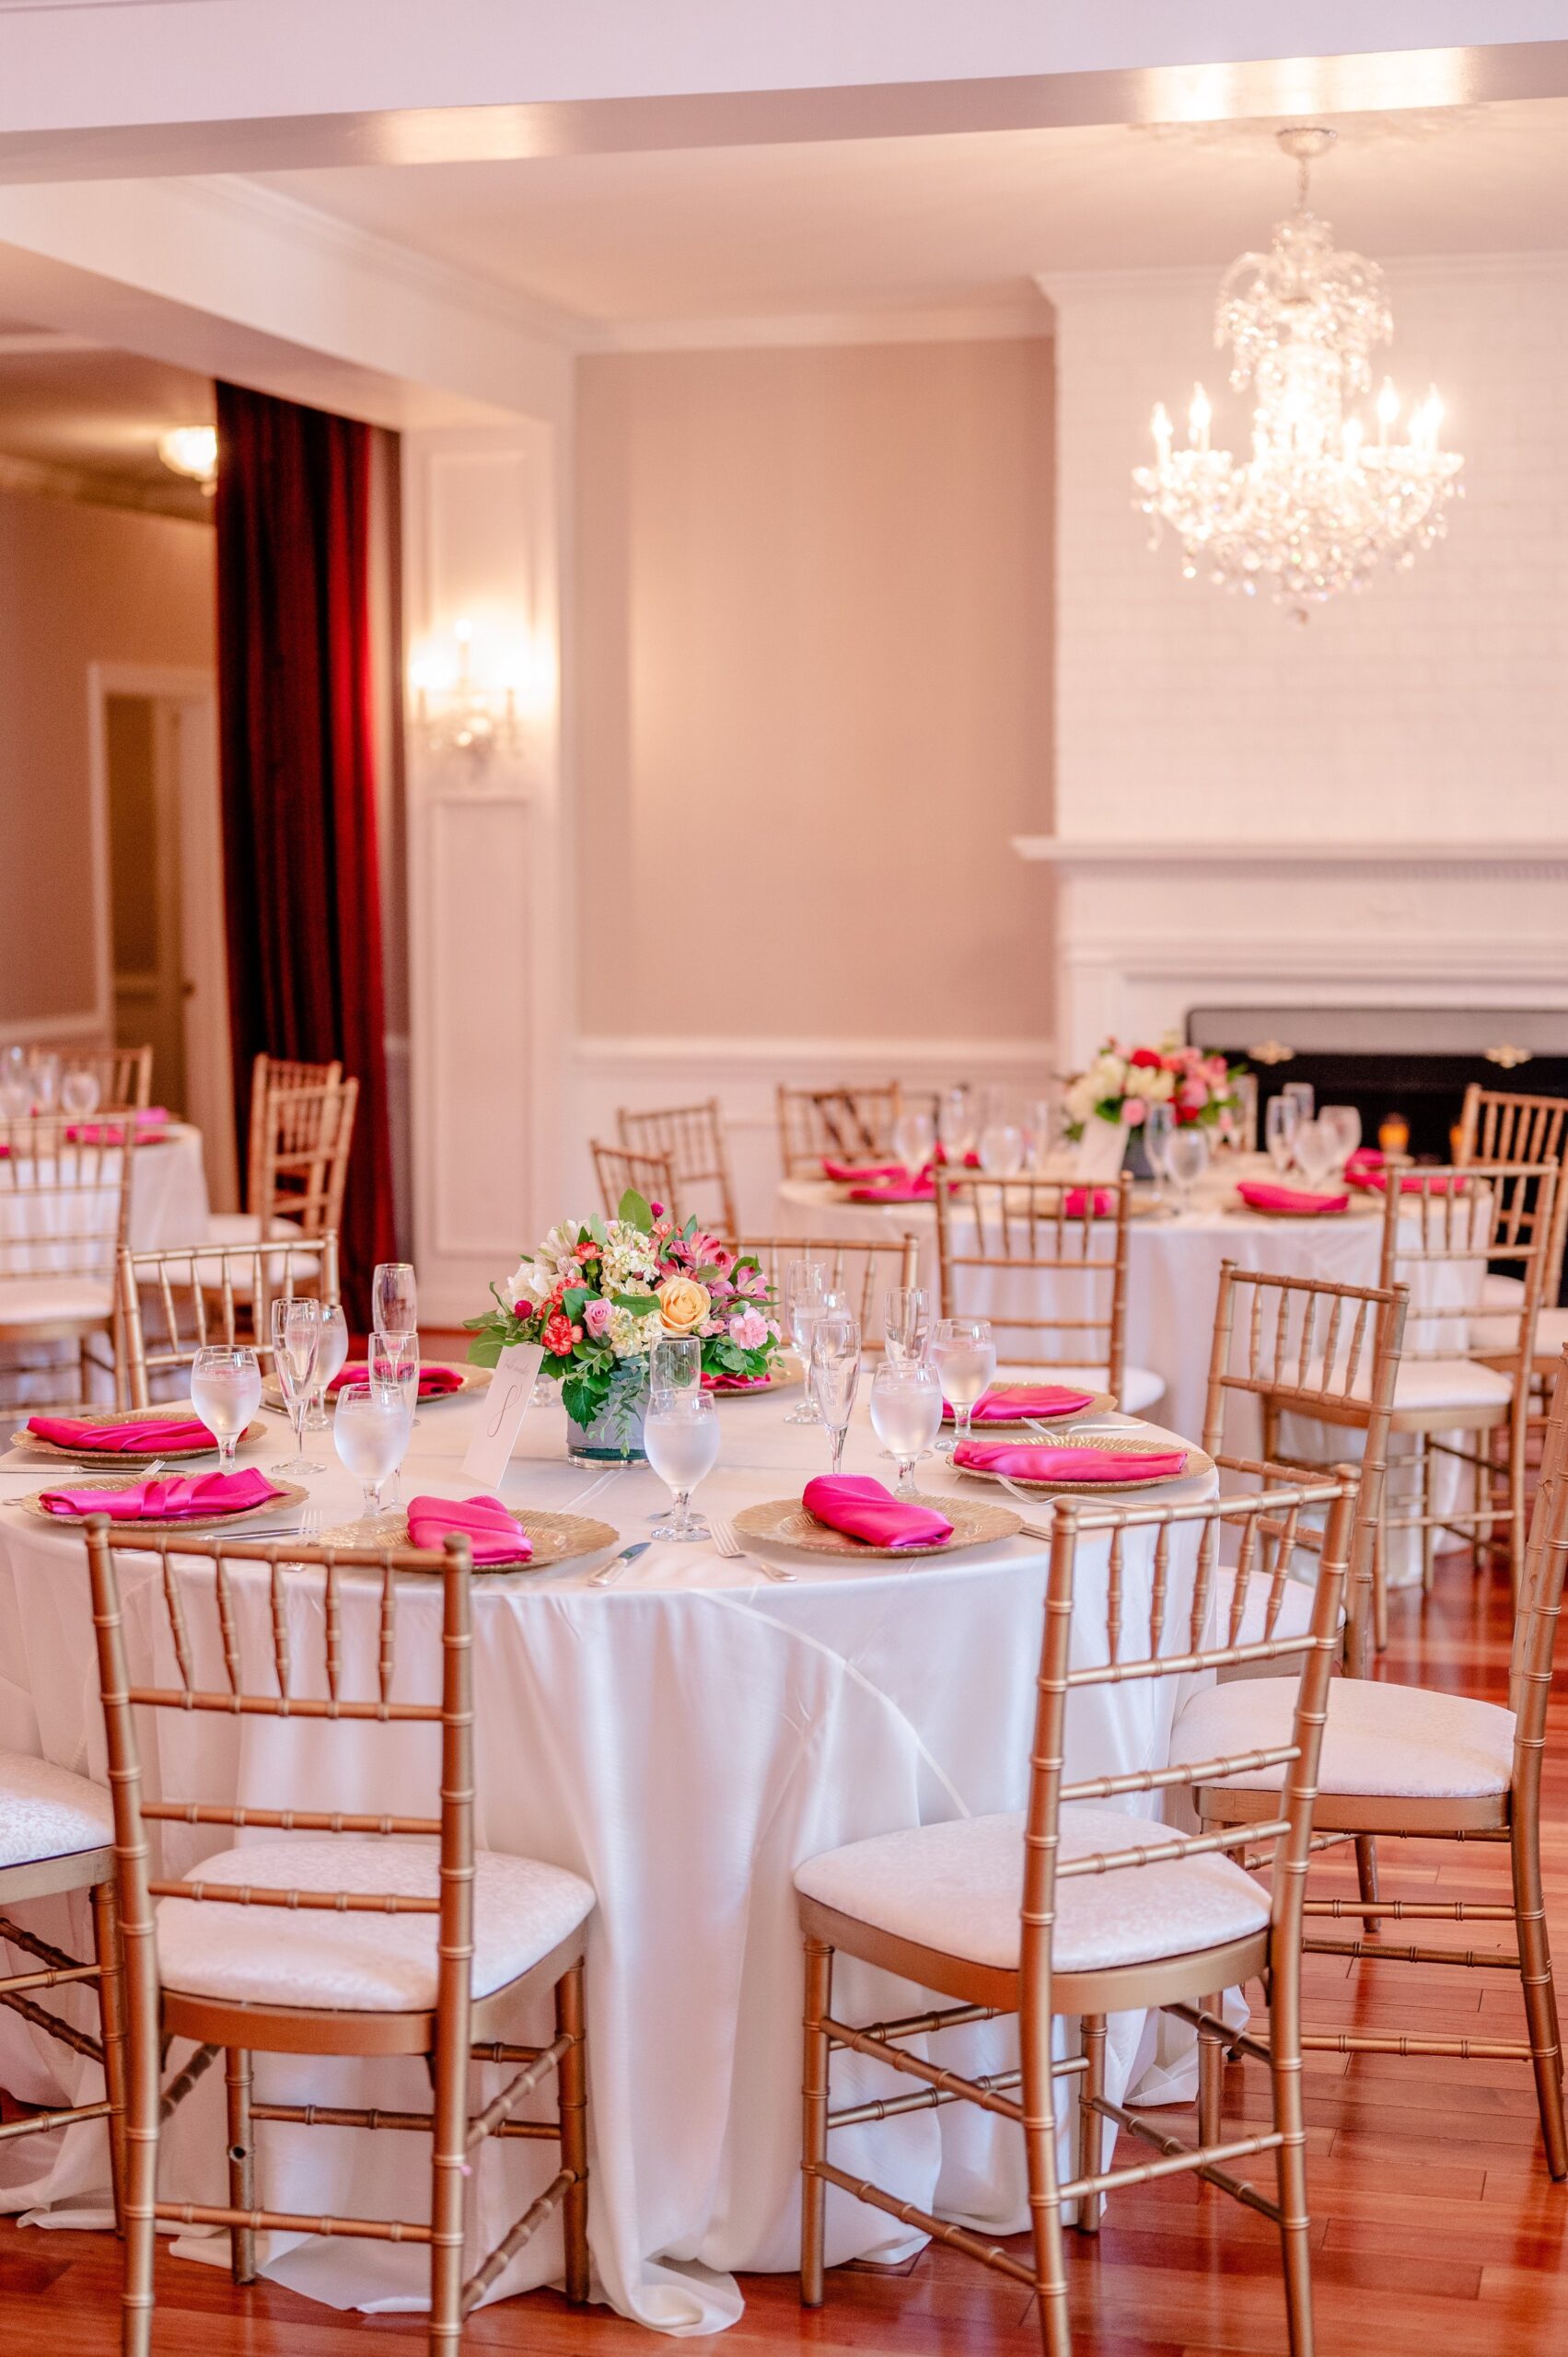 Dinner tables set with pink napkins and colorful floral arrangements at one of the best wedding venues in Loudoun County Virginia